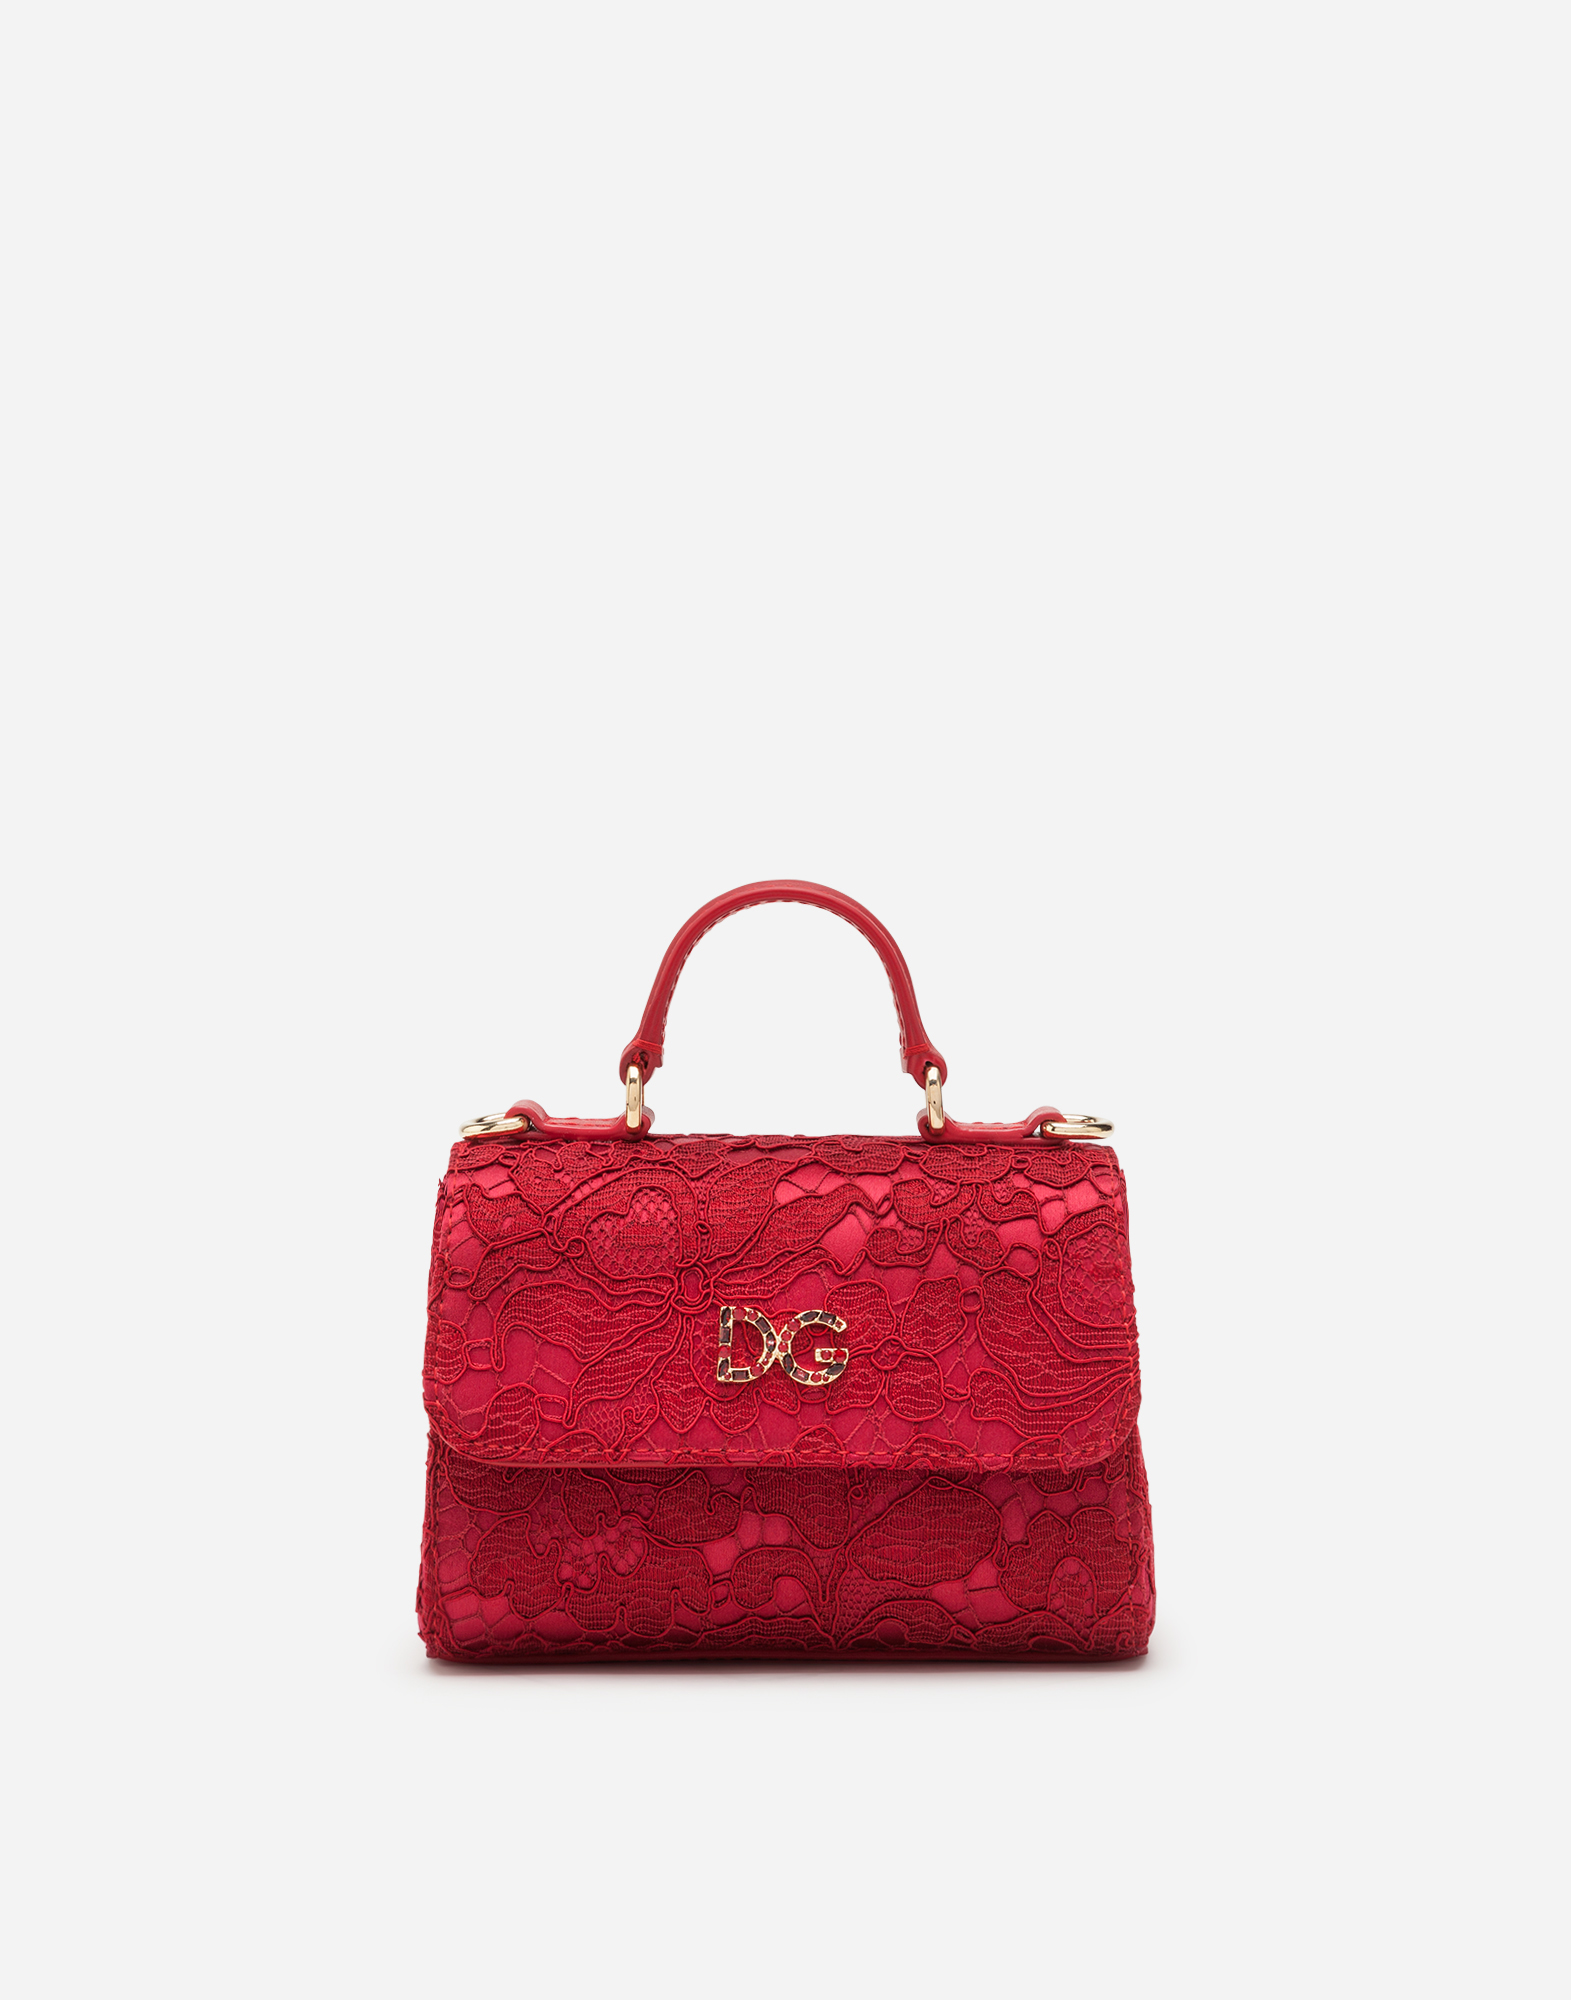 Handbag with lace DG logo in Red